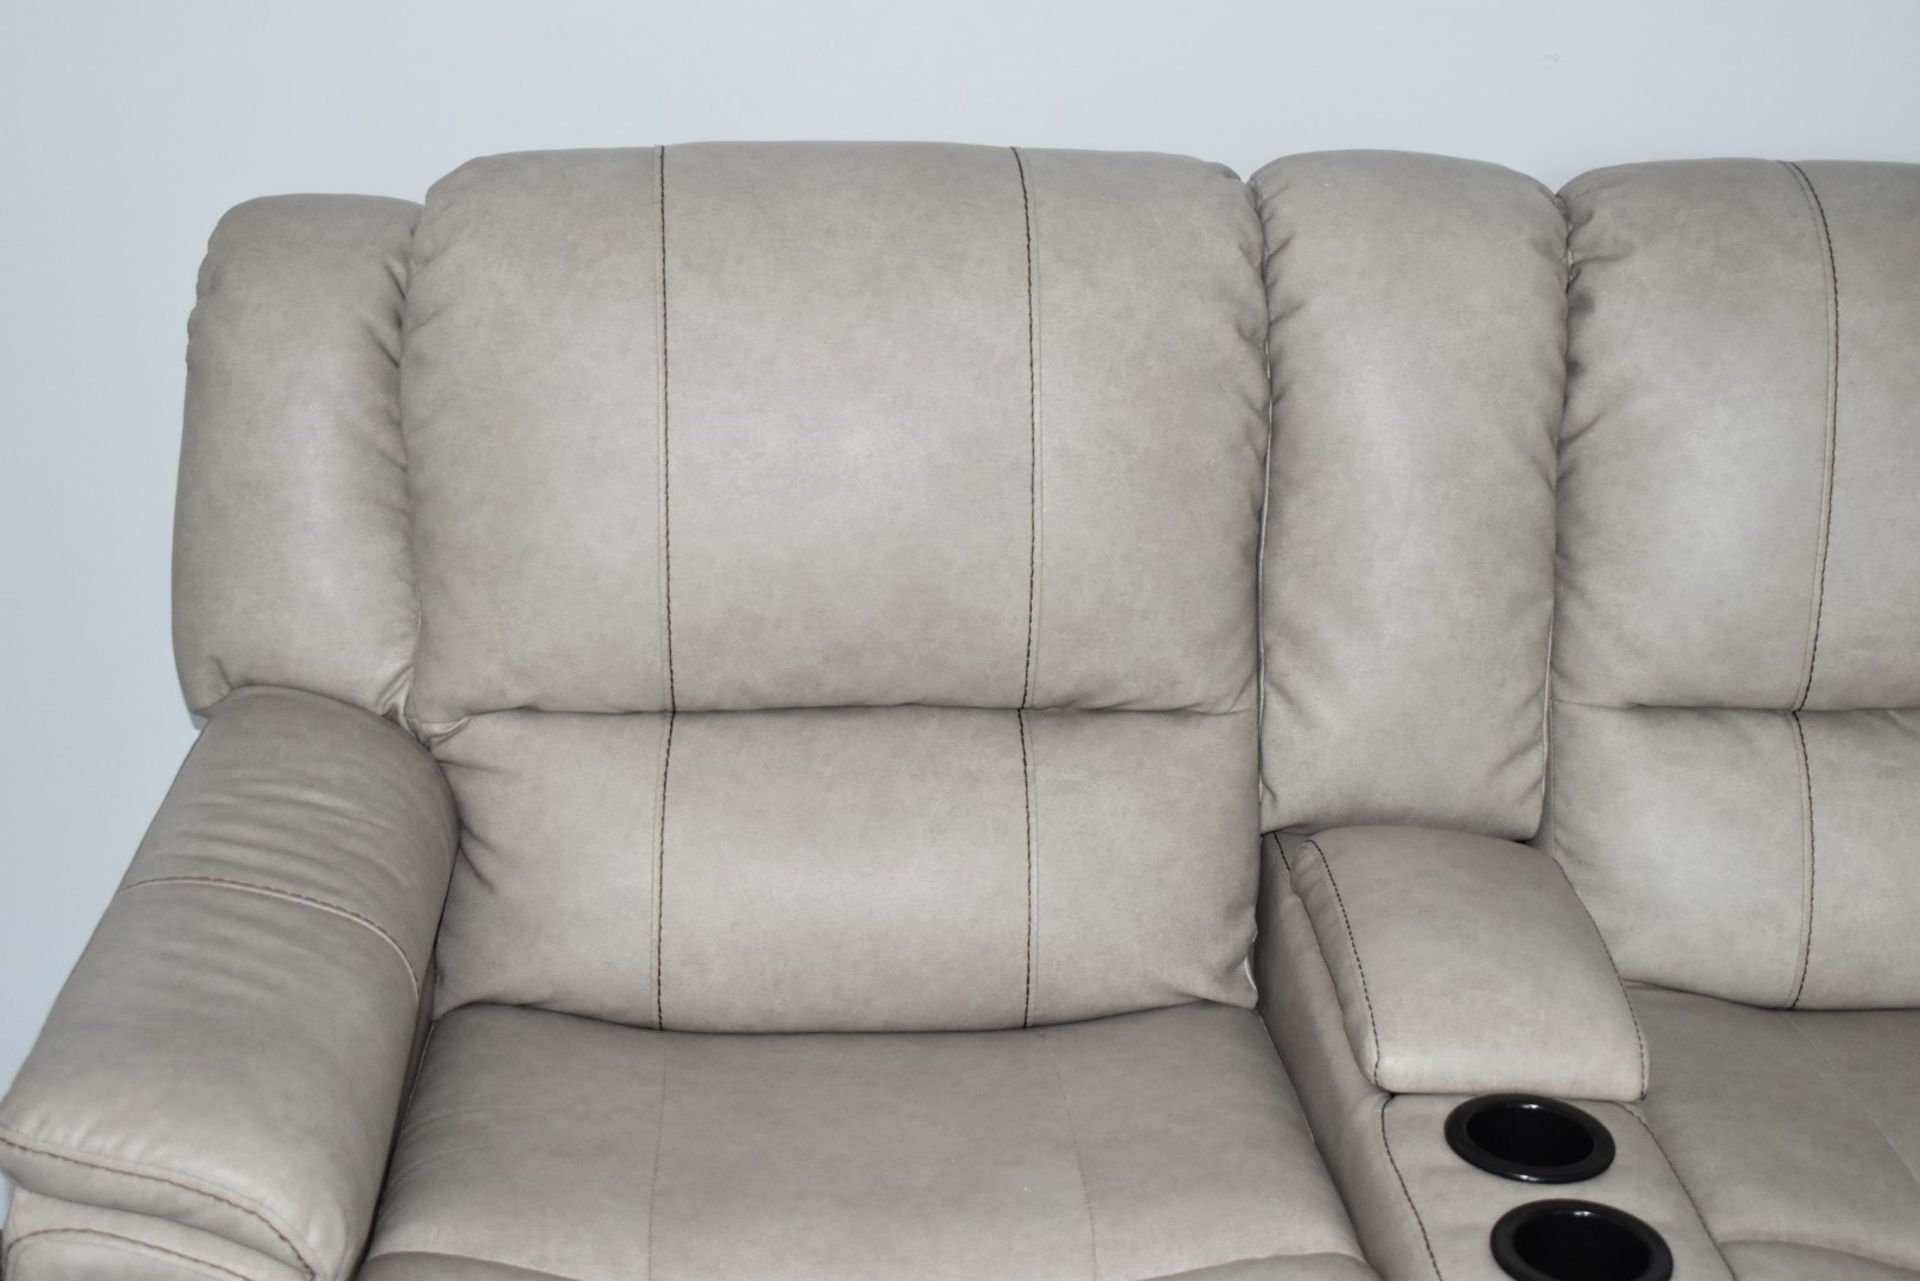 1 x Thomas Payne Reclining Wallhugger Theater Seating Love Seat Couch With Center Console and - Image 11 of 12